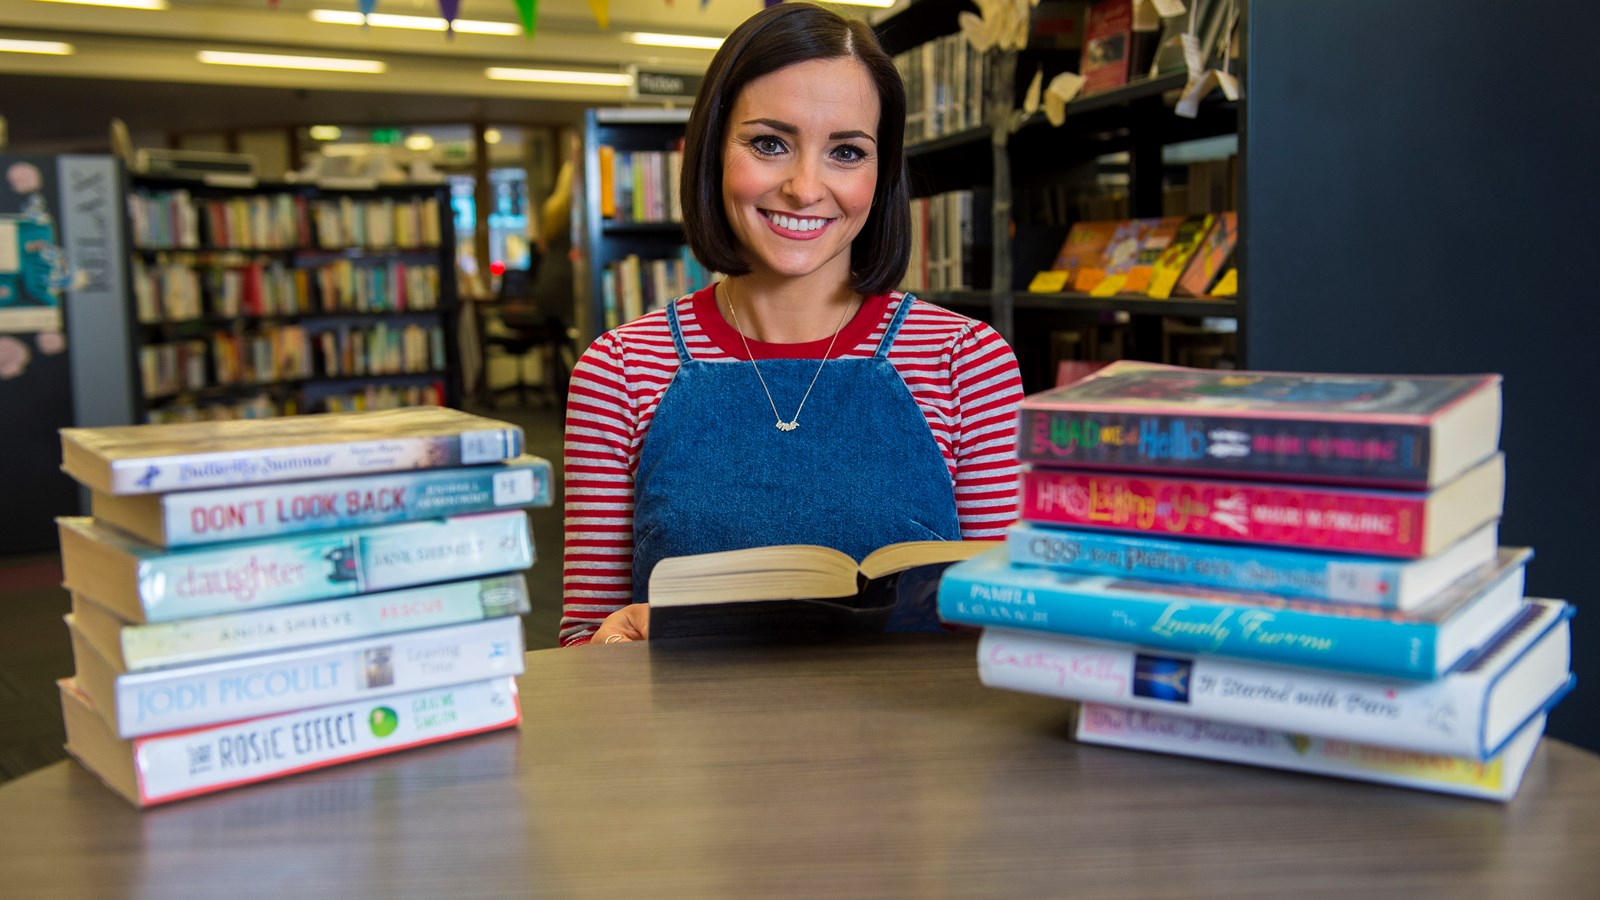 A person sitting at a table in a library between two piles of books. They are holding a book and smiling.